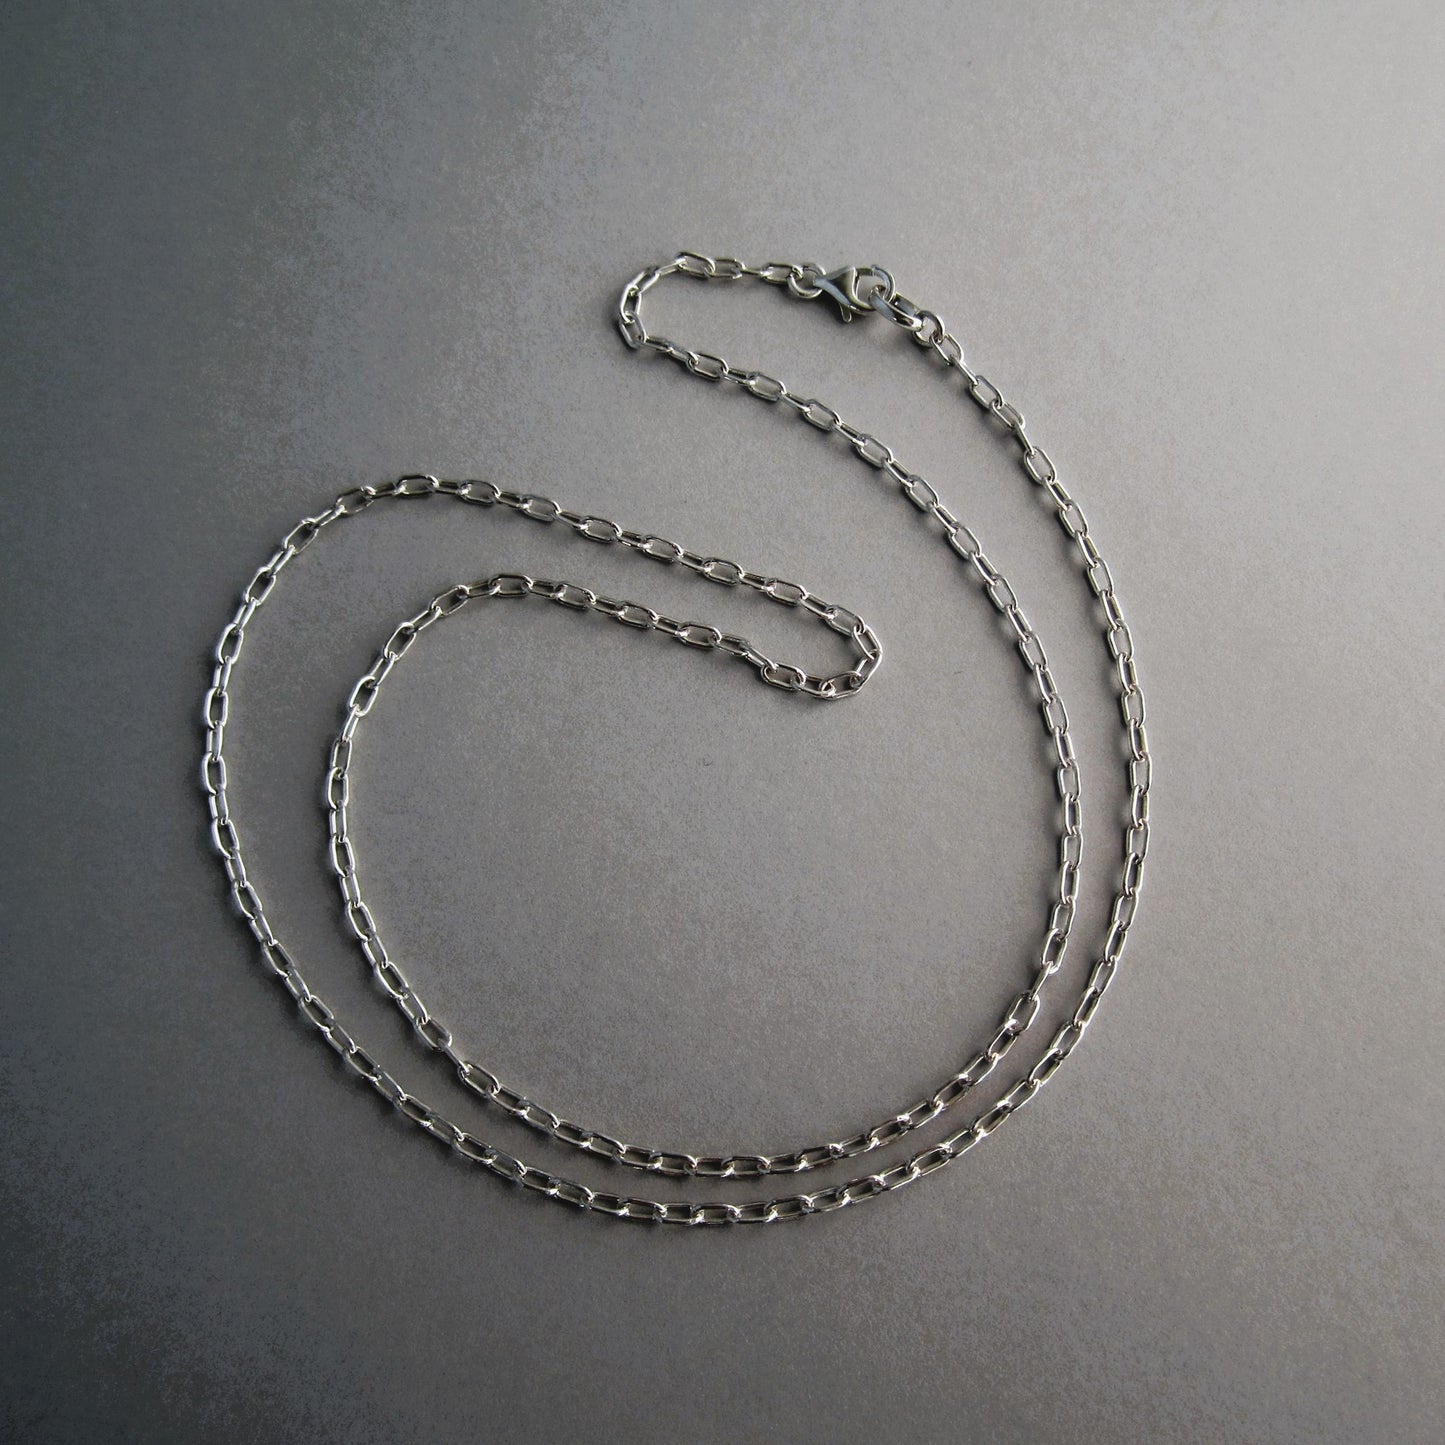 Cable Chain Medium Weight Sterling Silver